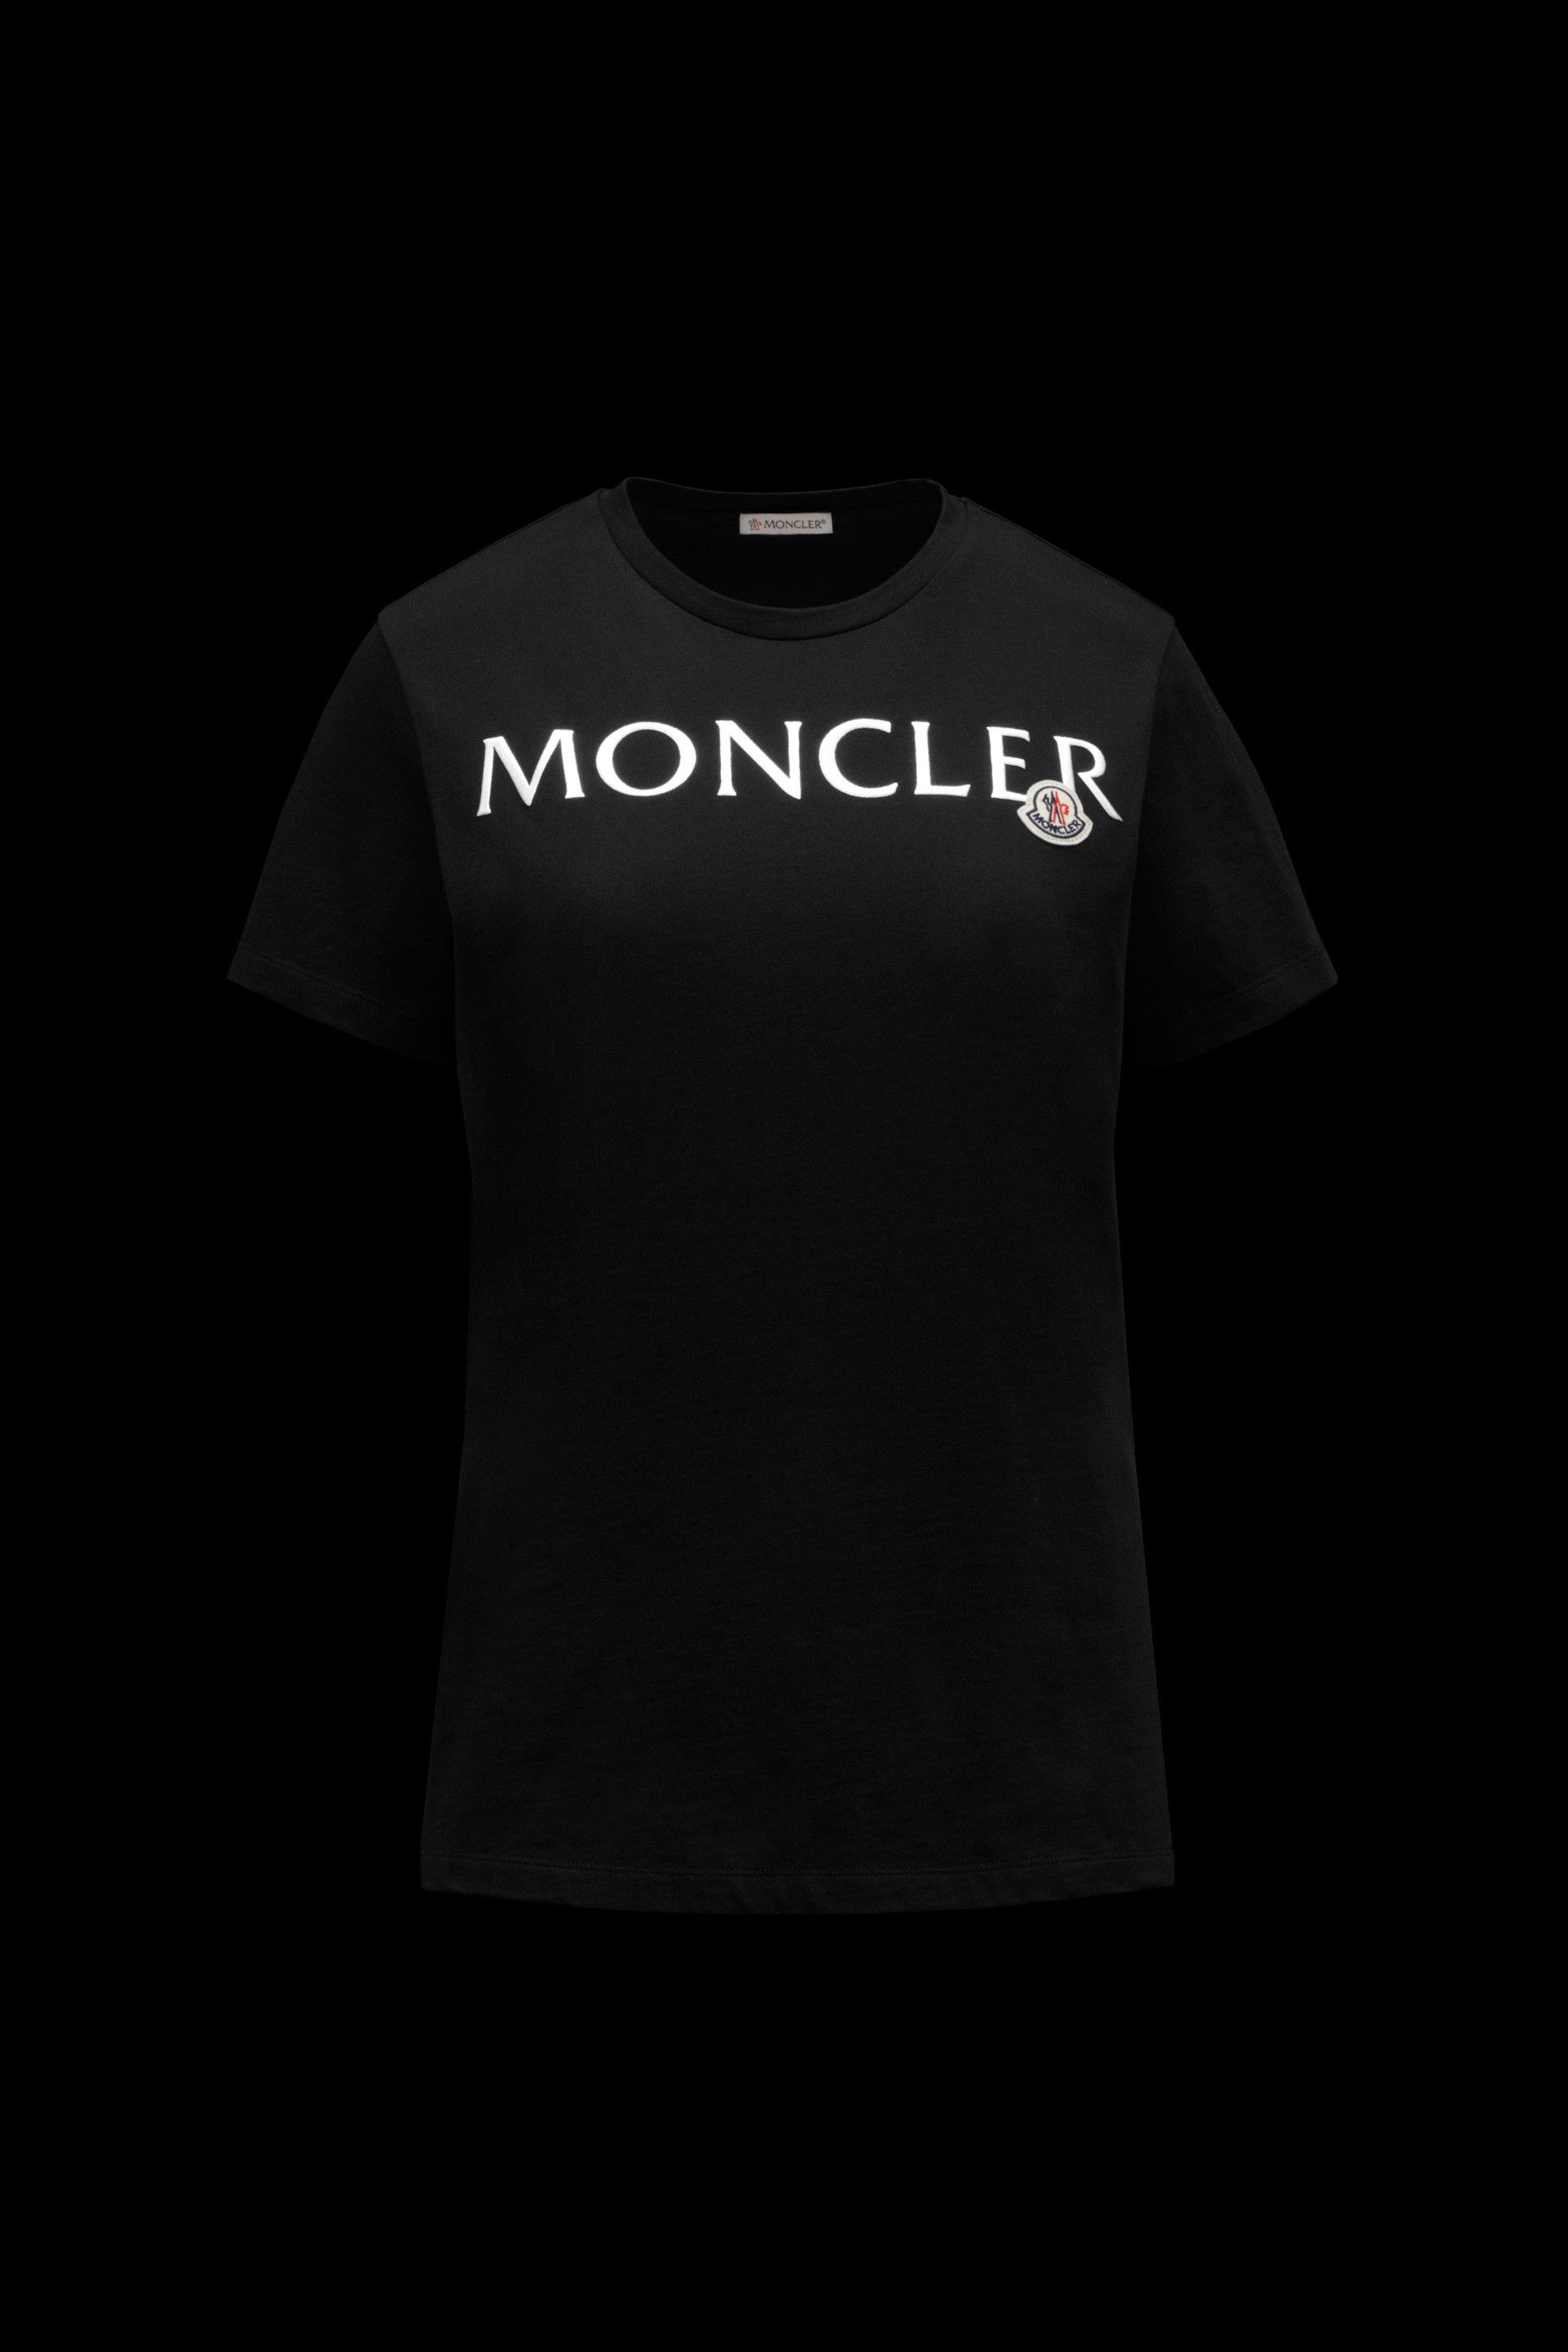 Moncler Moncler T-Shirt With 3D Graphic | Grailed